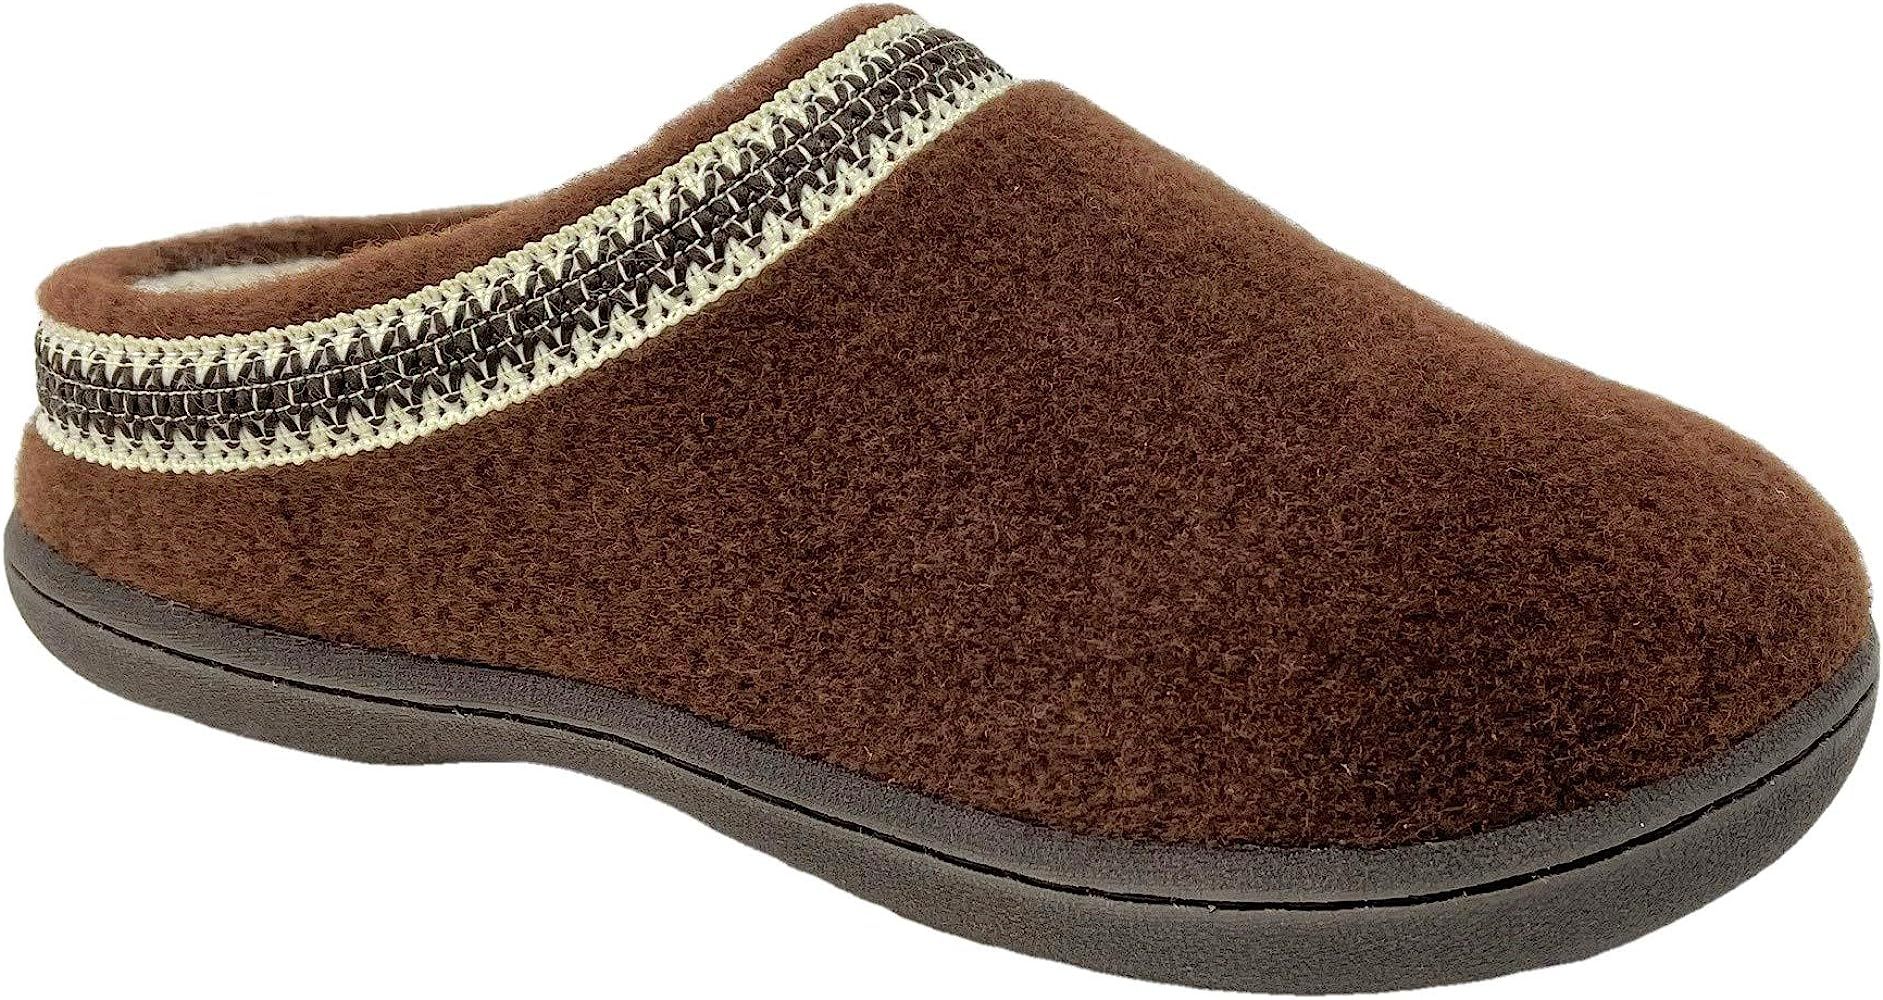 Clarks Womens Wool Felt Clog Slippers JMH1319T - Warm Cozy Plush Faux Fur Lined - Indoor Outdoor Hou | Amazon (US)